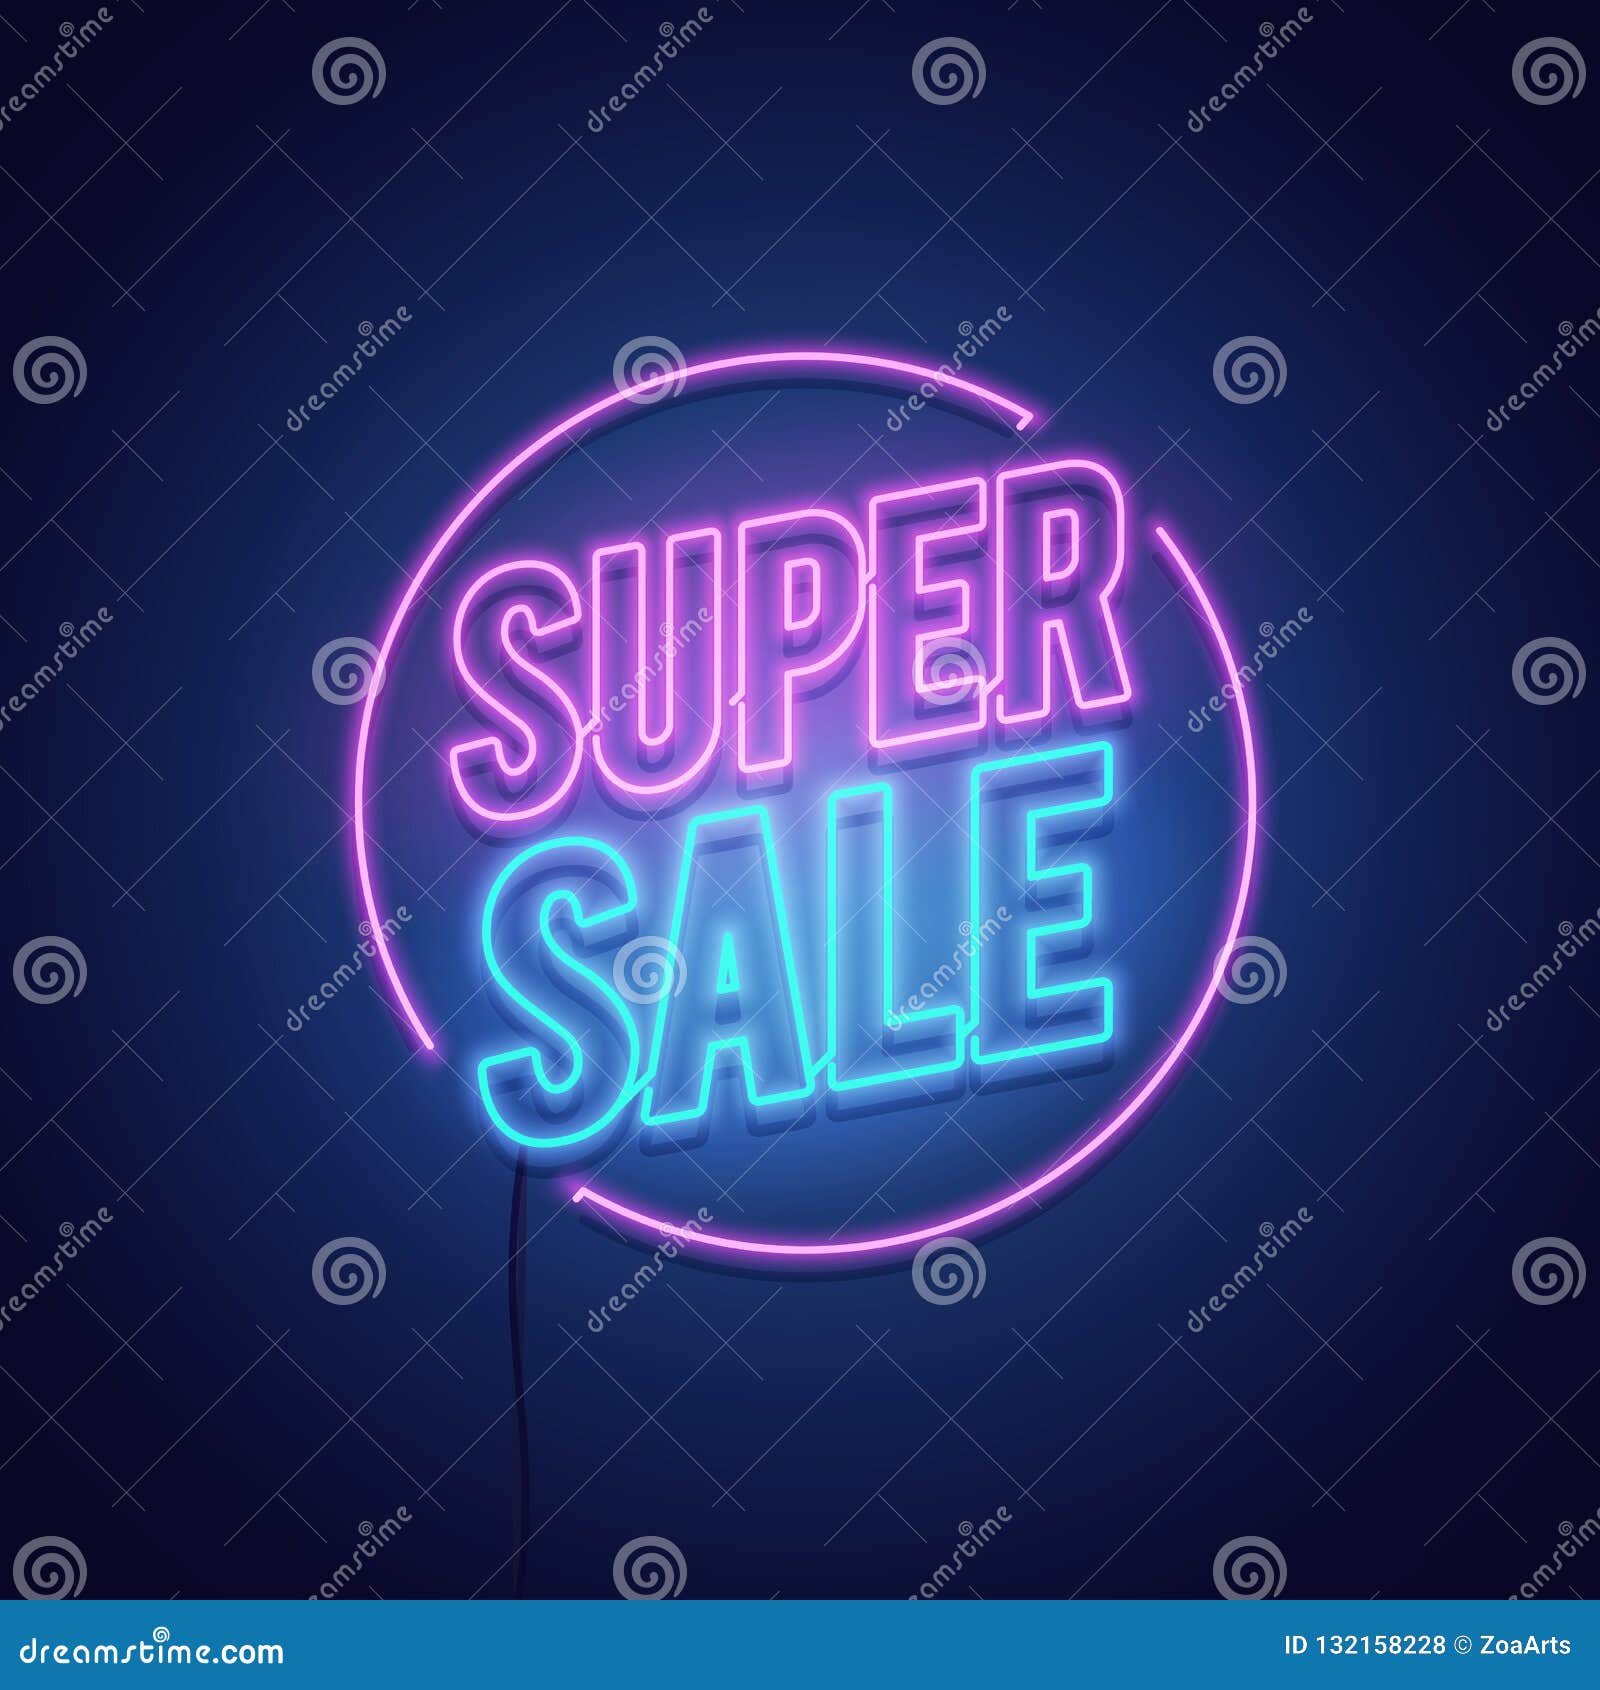 Vector Illustration High Detailed Glowing Retro Sale Neon Word Sign With Electric Light Parts Background For Your Advertise Disc Stock Vector Illustration Of Light Decorative 132158228